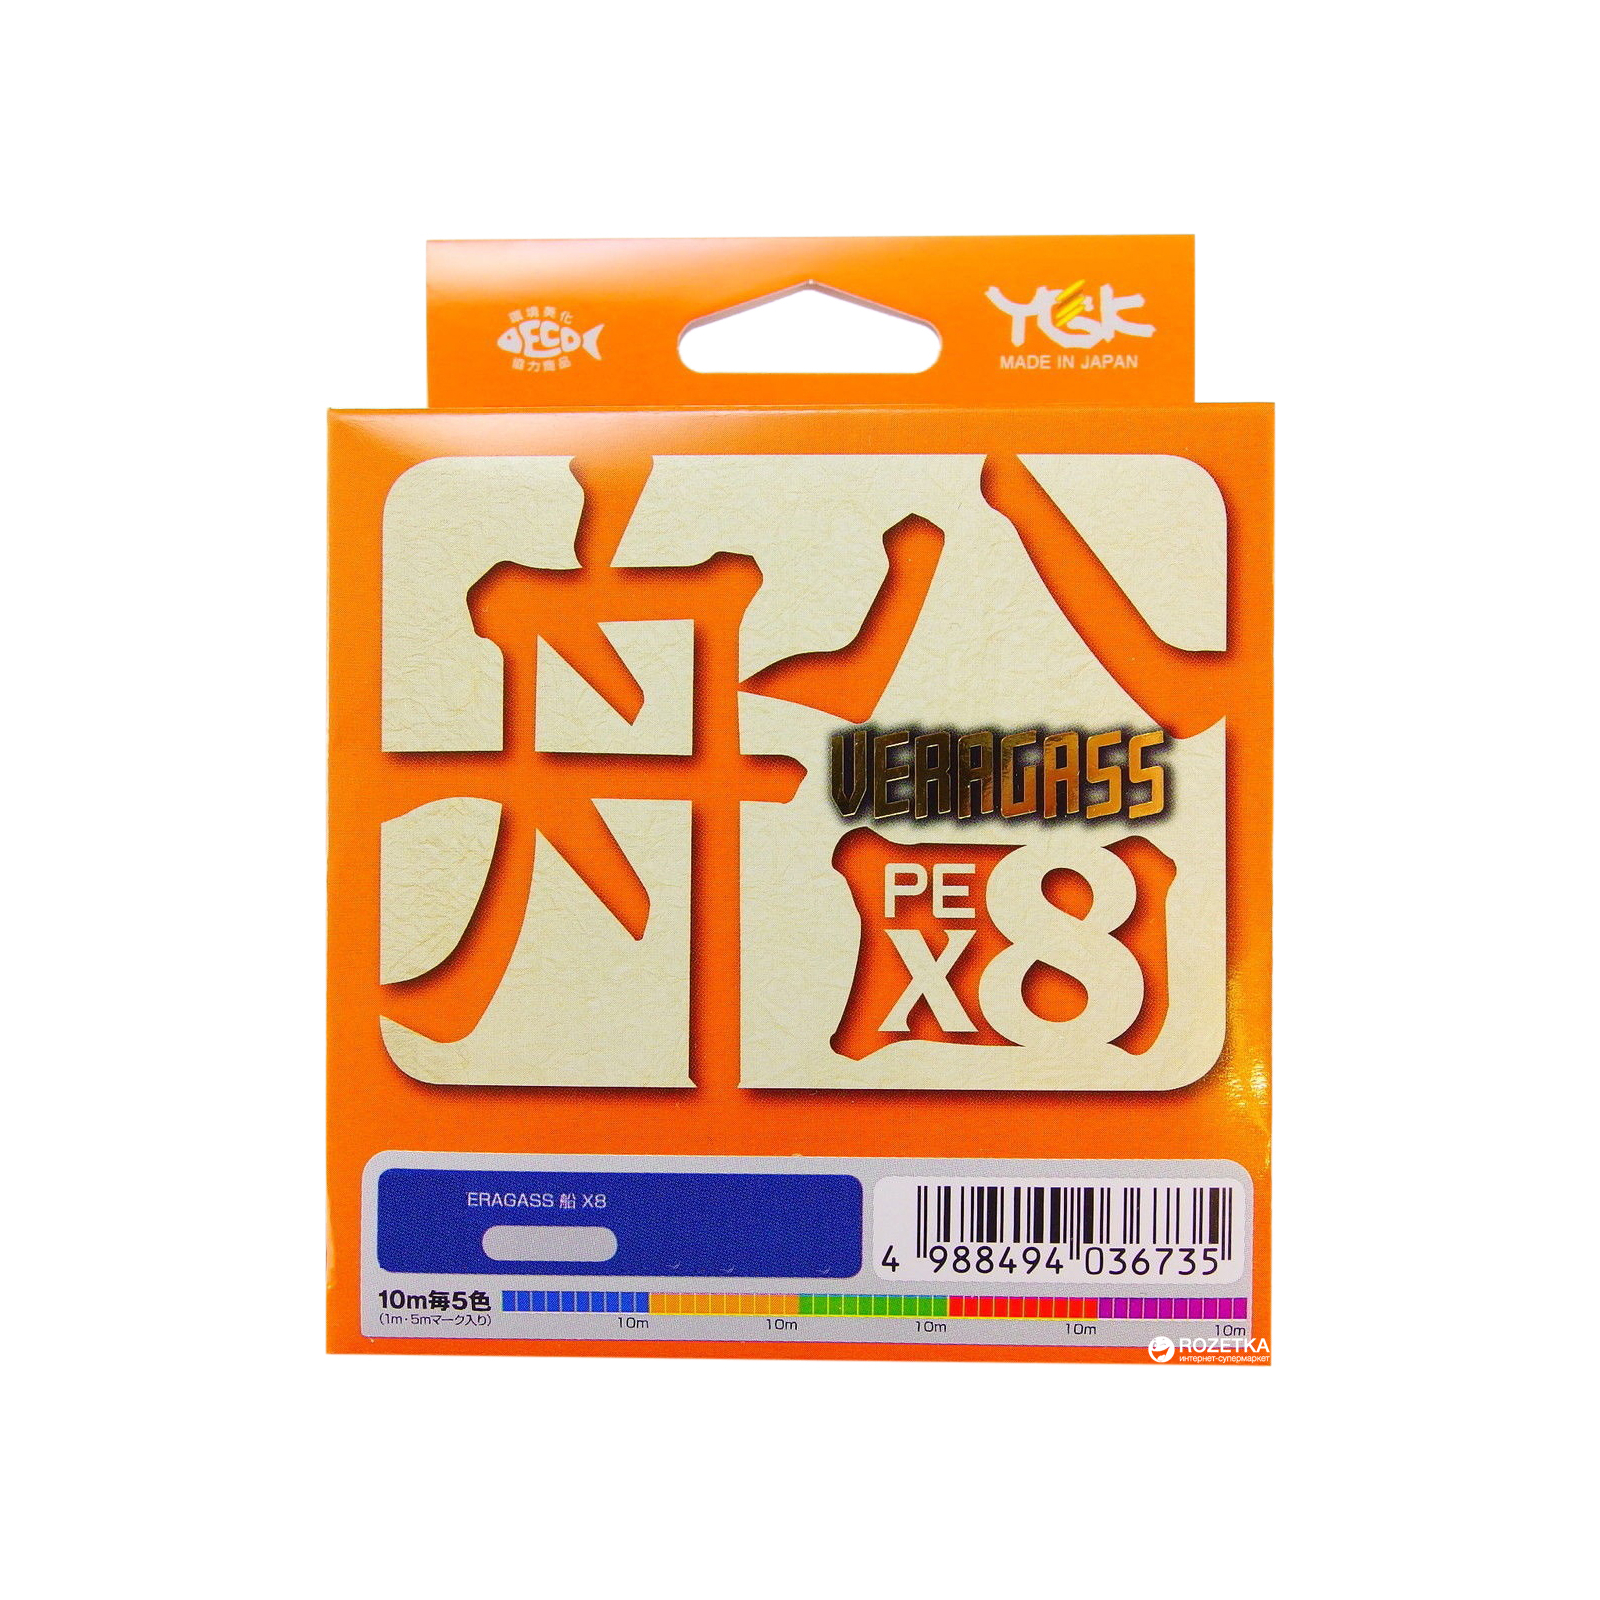 Шнур YGK Veragass Fune X8 - 100m connect 2.5/19kg 10m x 5 colors (5545.02.75)